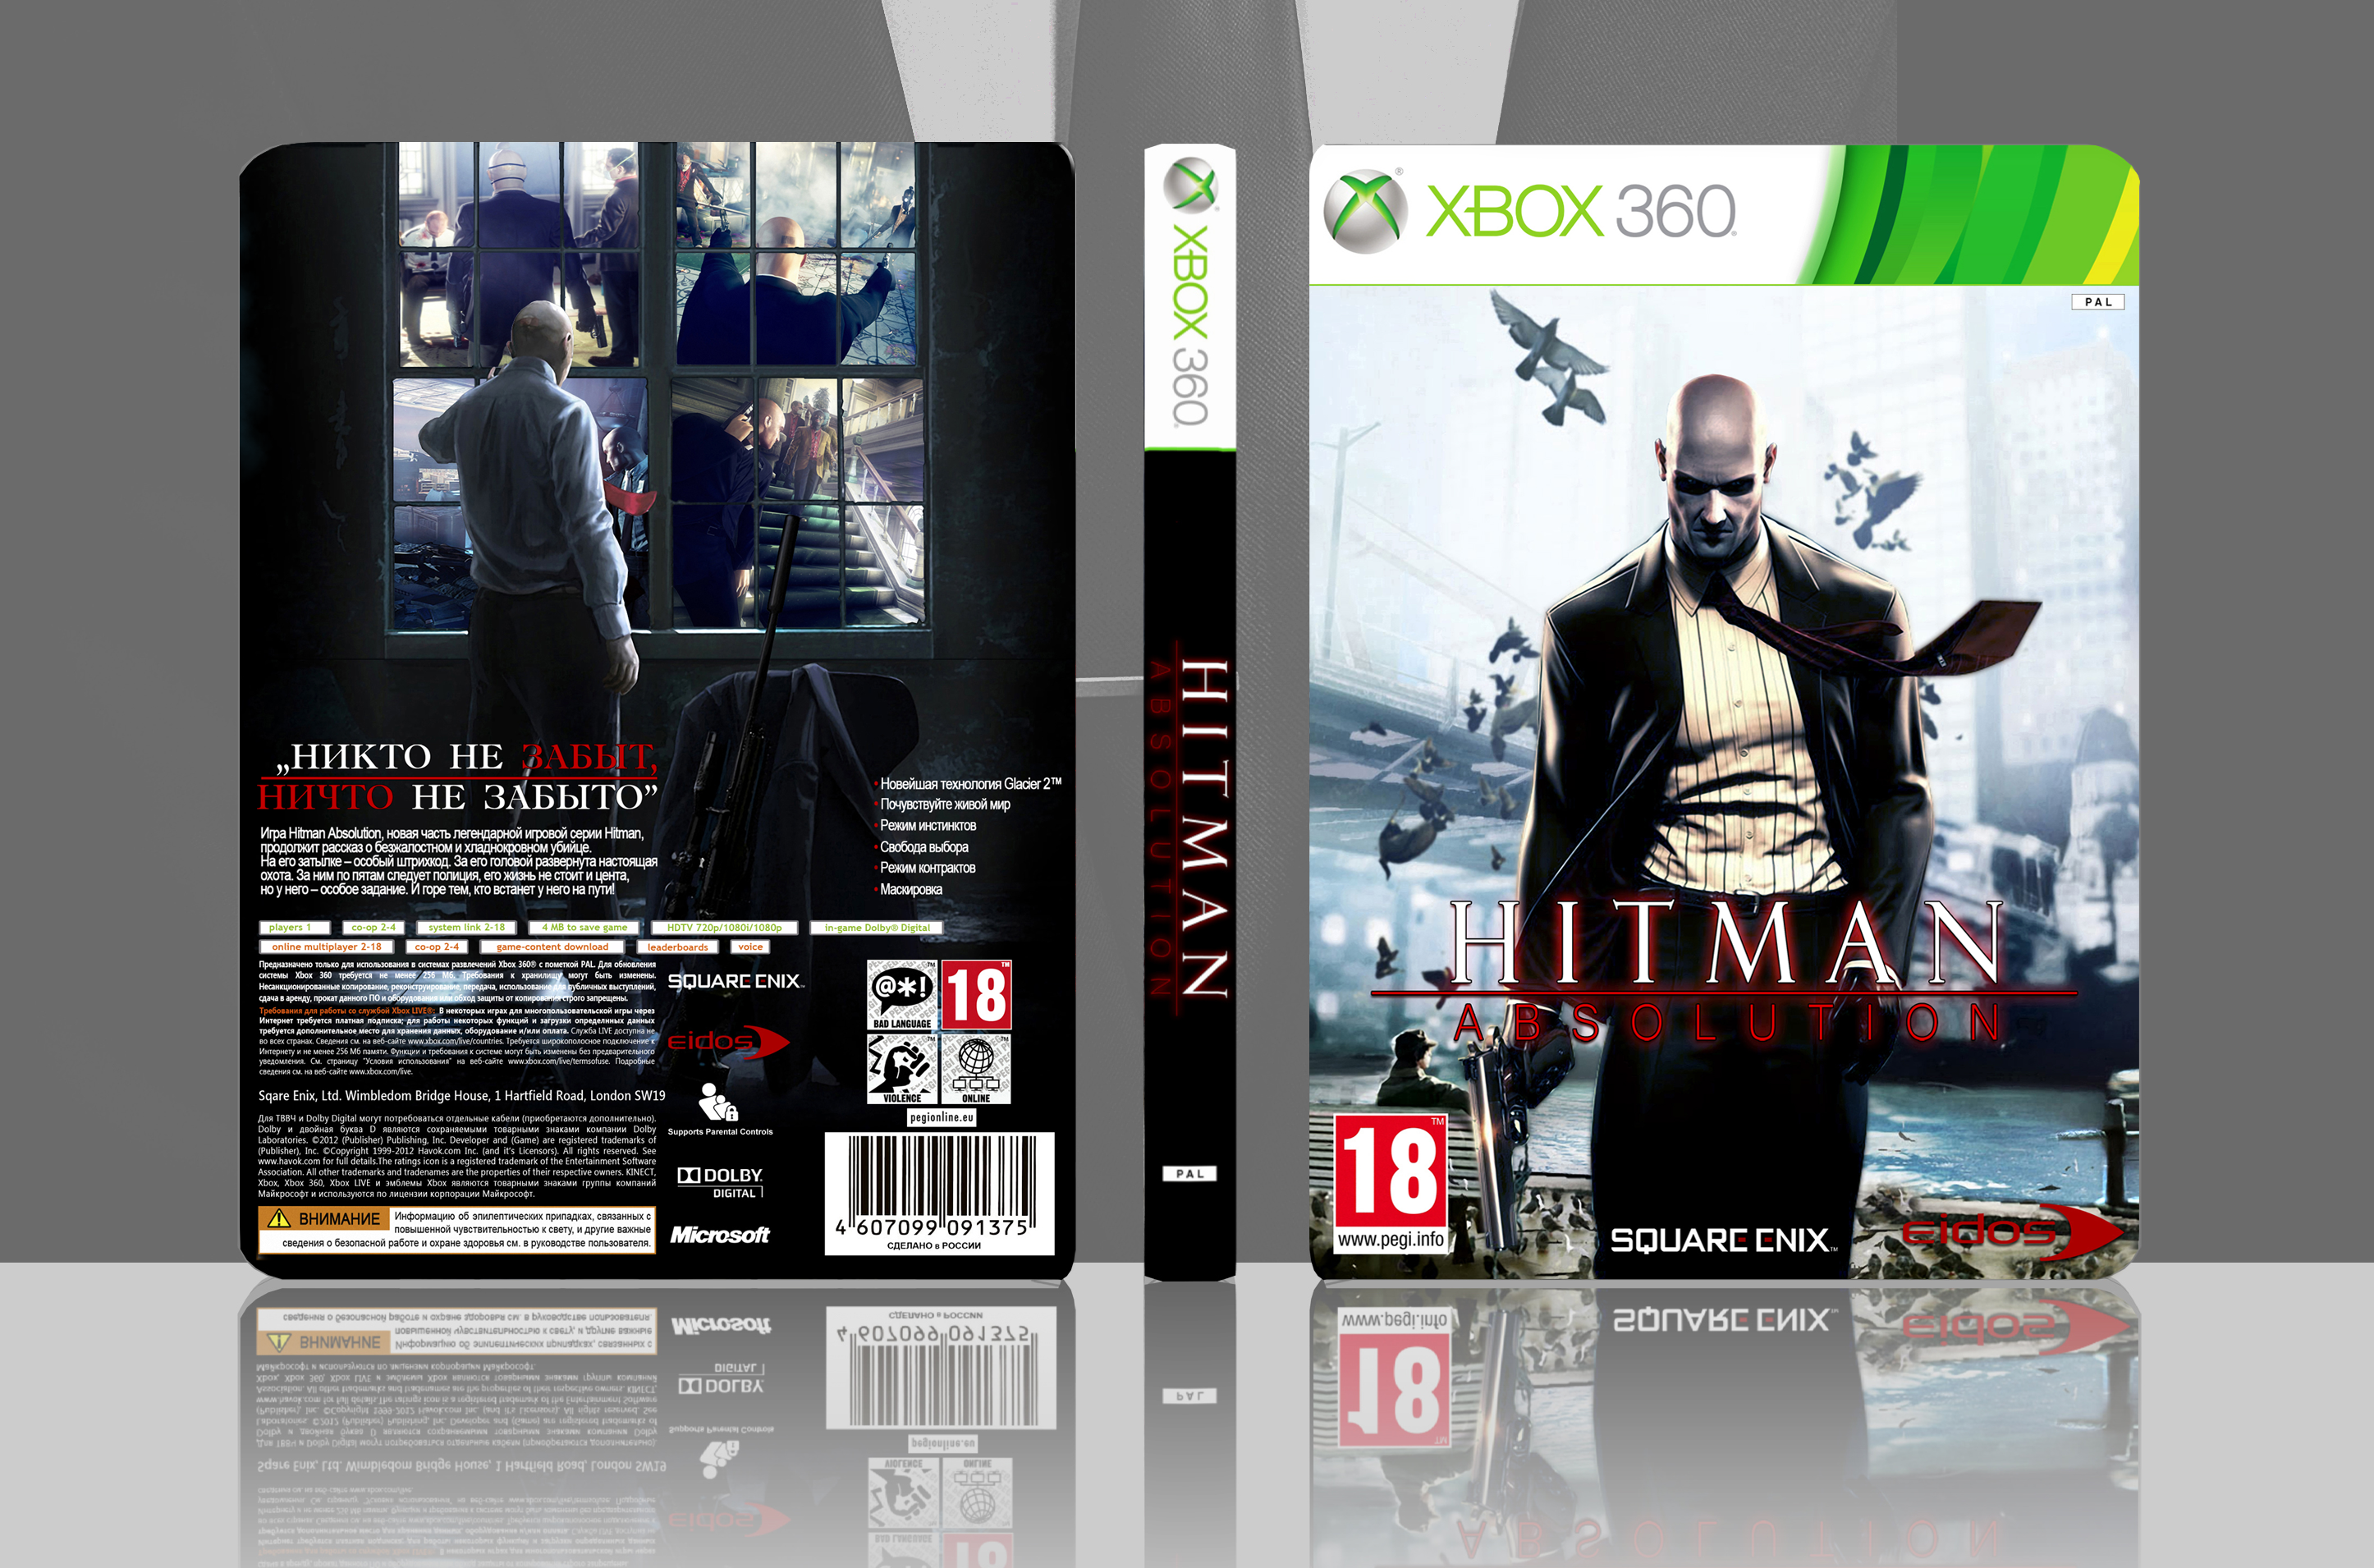 hitman absolution xbox one download